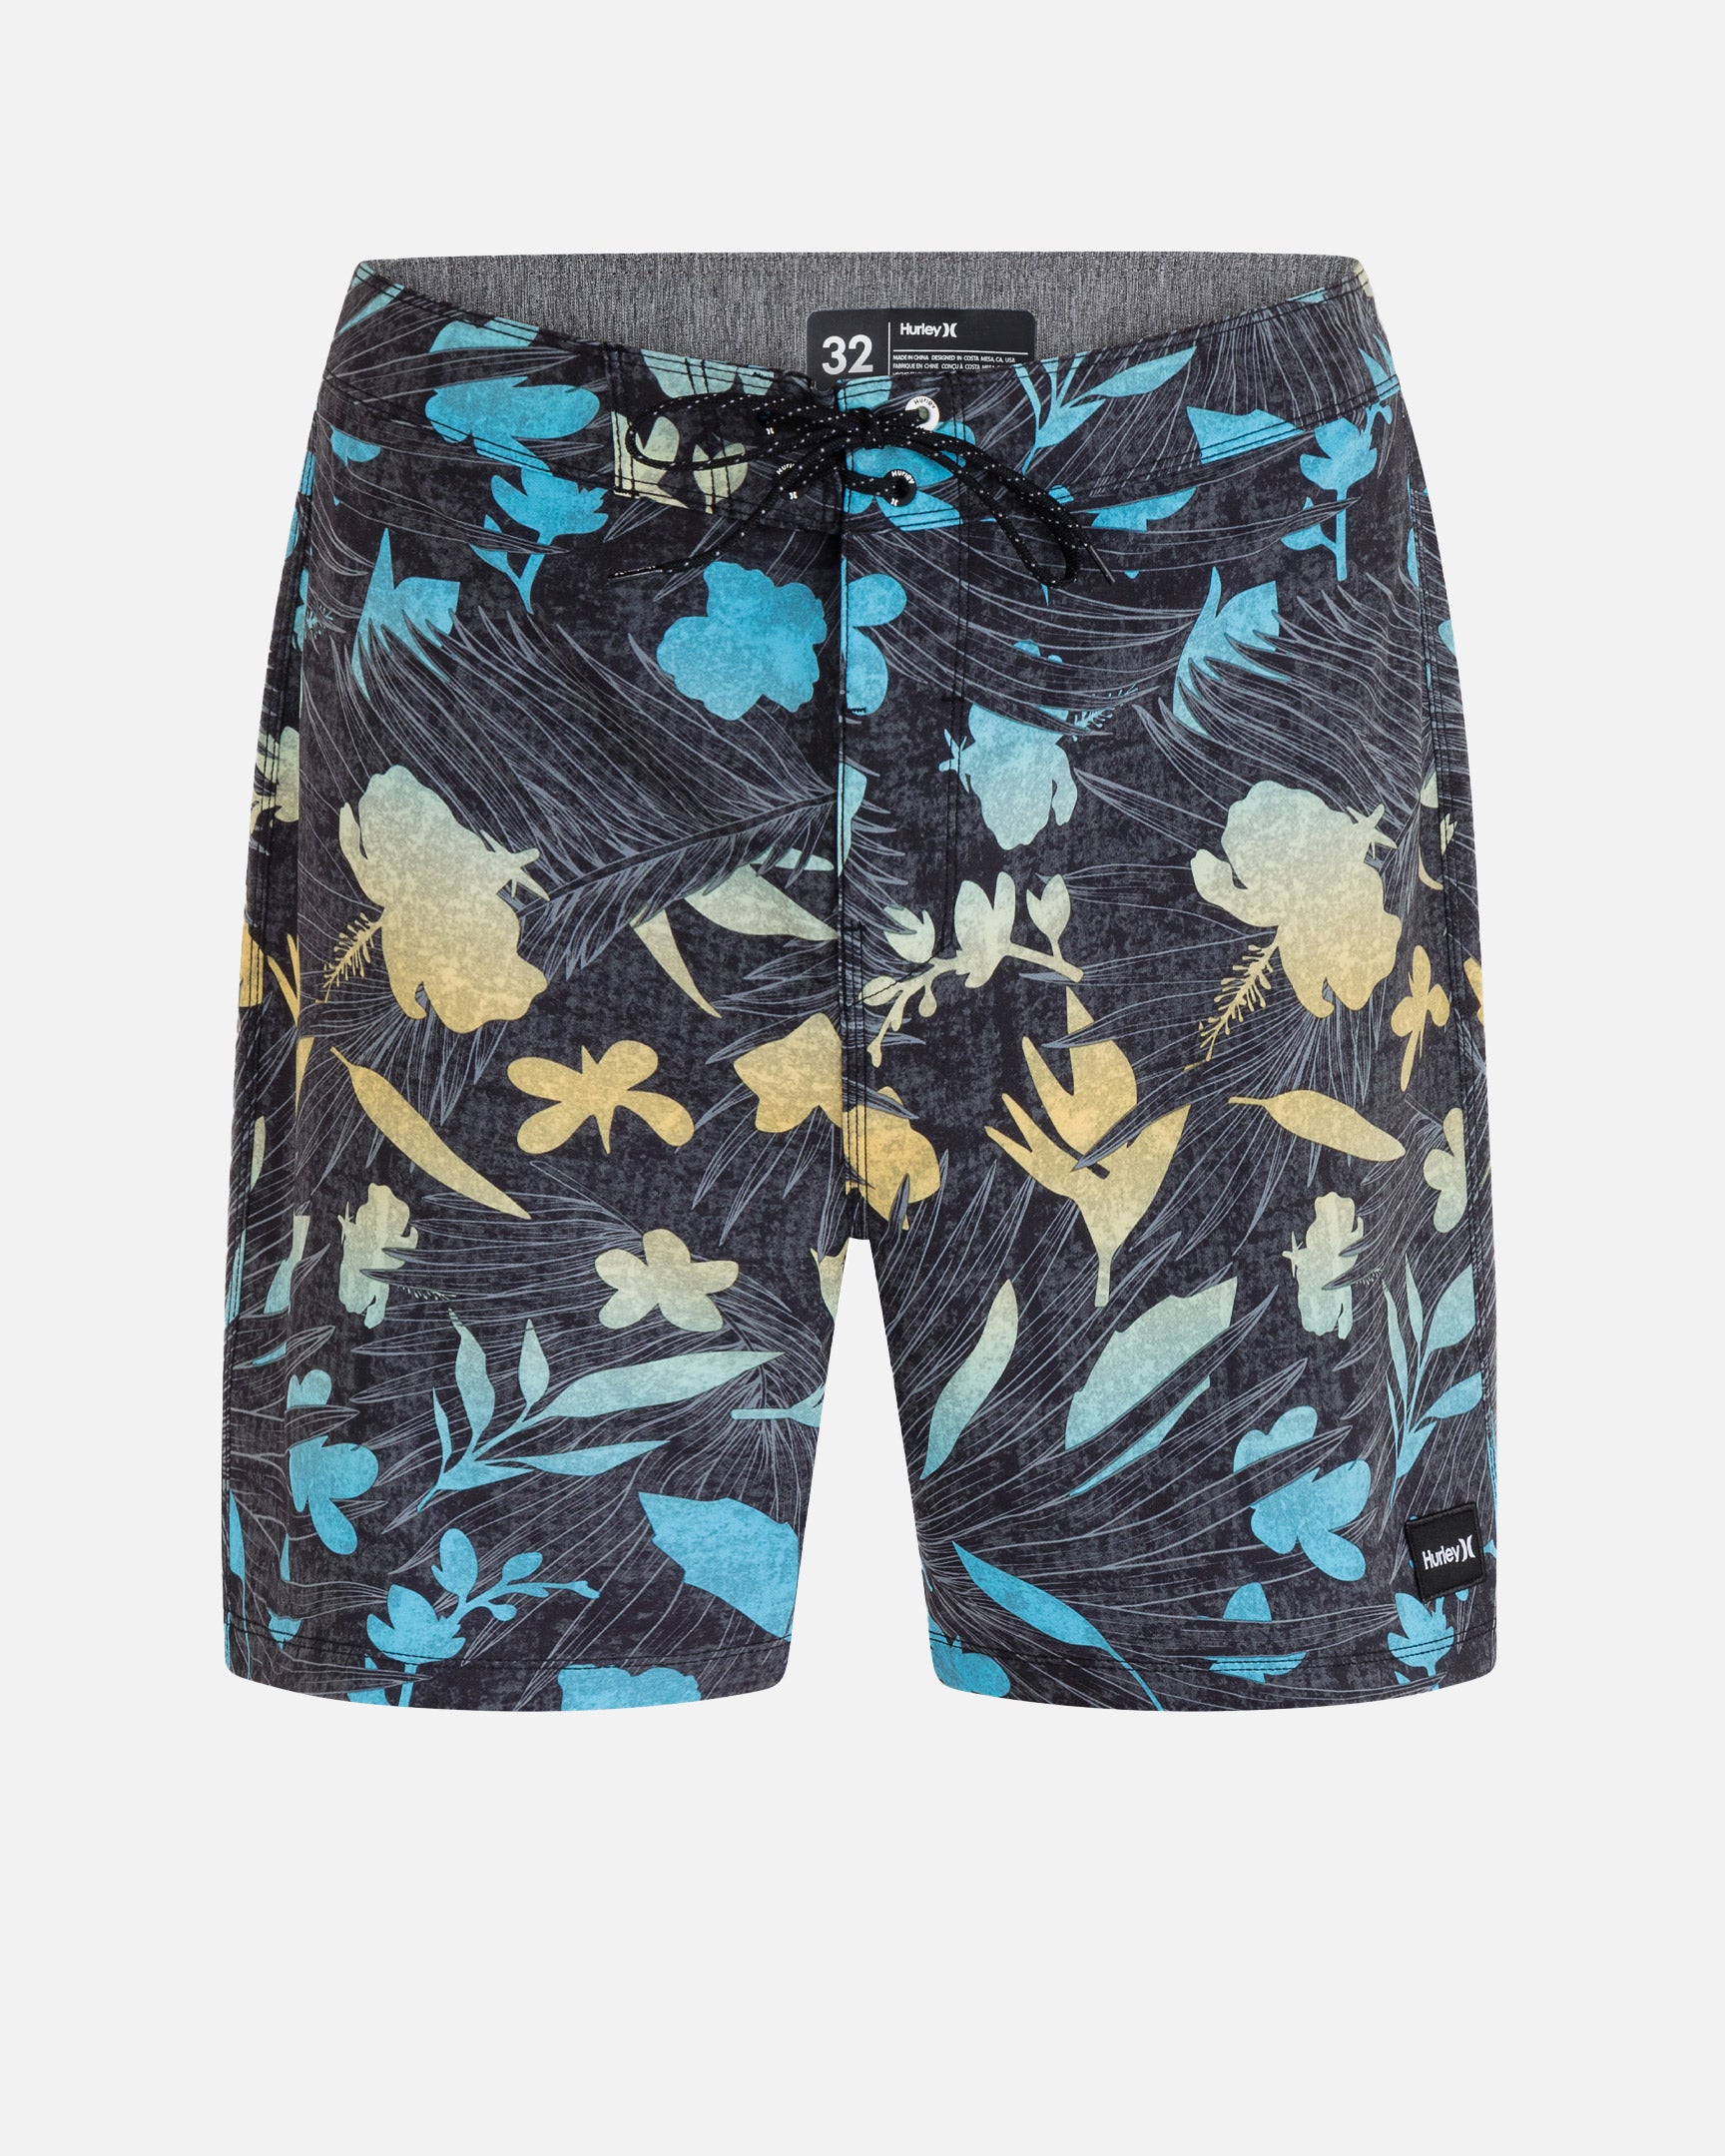  Hand Painted Honeycomb with Bees Men Beach Shorts with Elastic,  Casual Drawstring Volleyball Board Shorts Multicolor : Clothing, Shoes &  Jewelry